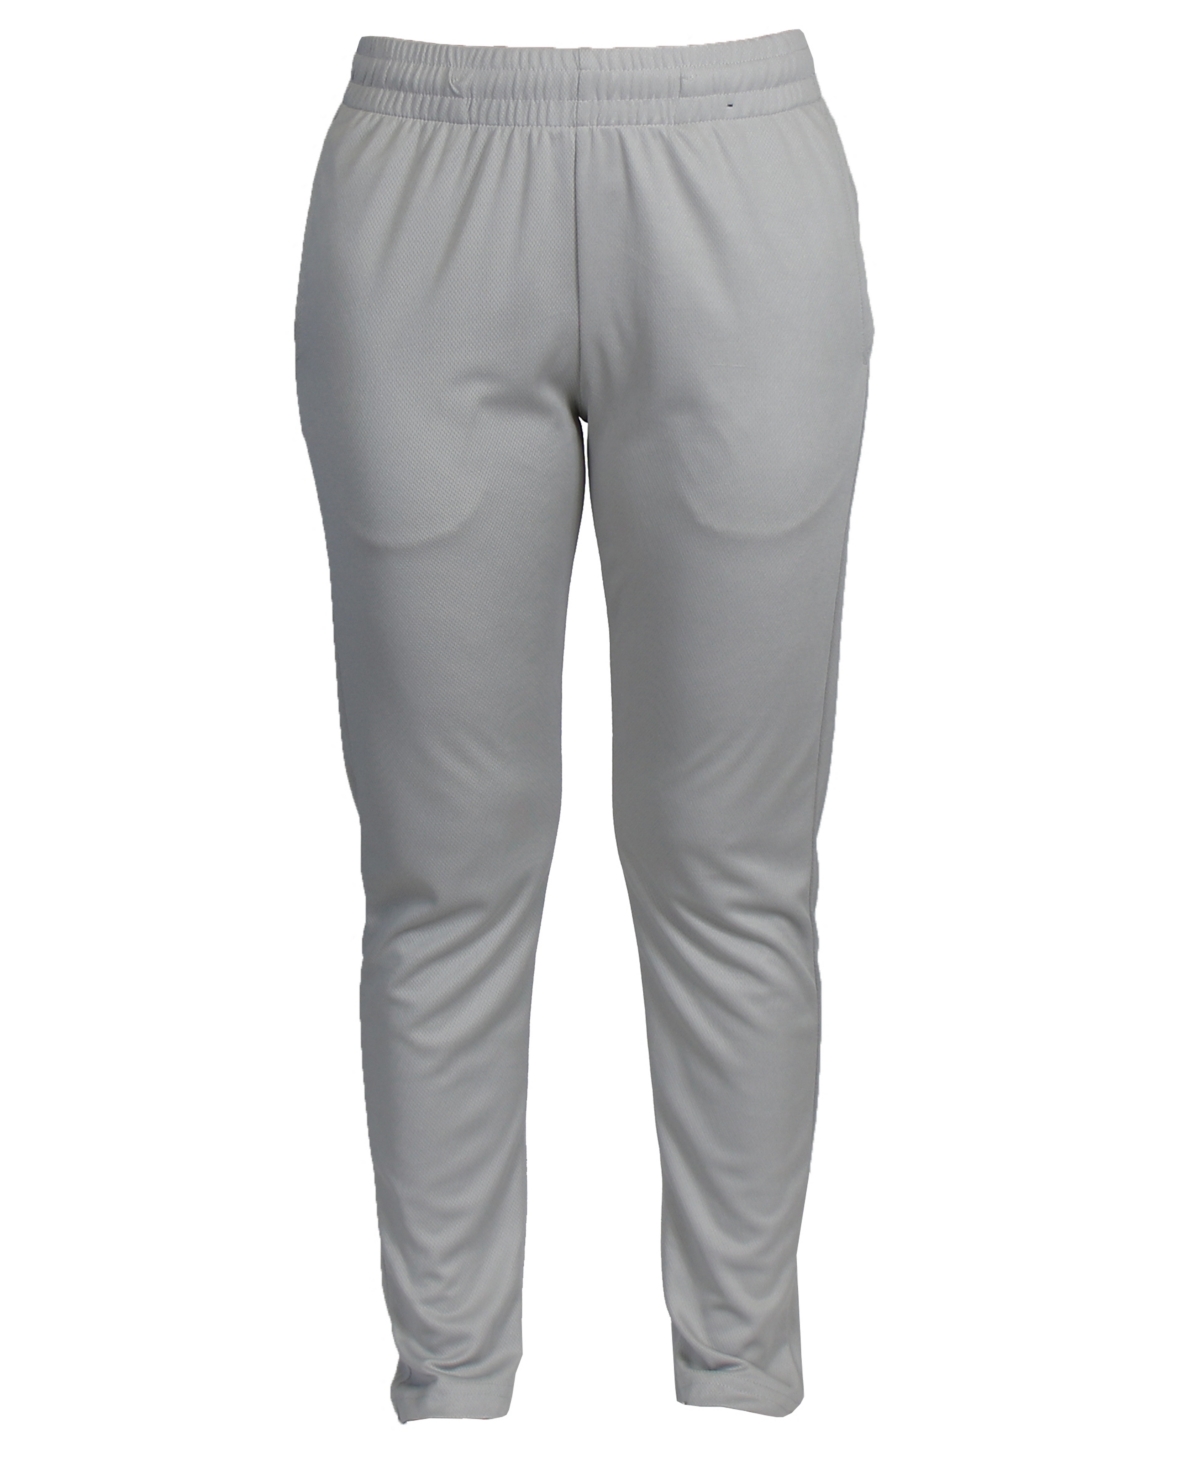 Galaxy By Harvic Men's Dry Fit Moisture Wicking Performance Active Pants In Silver